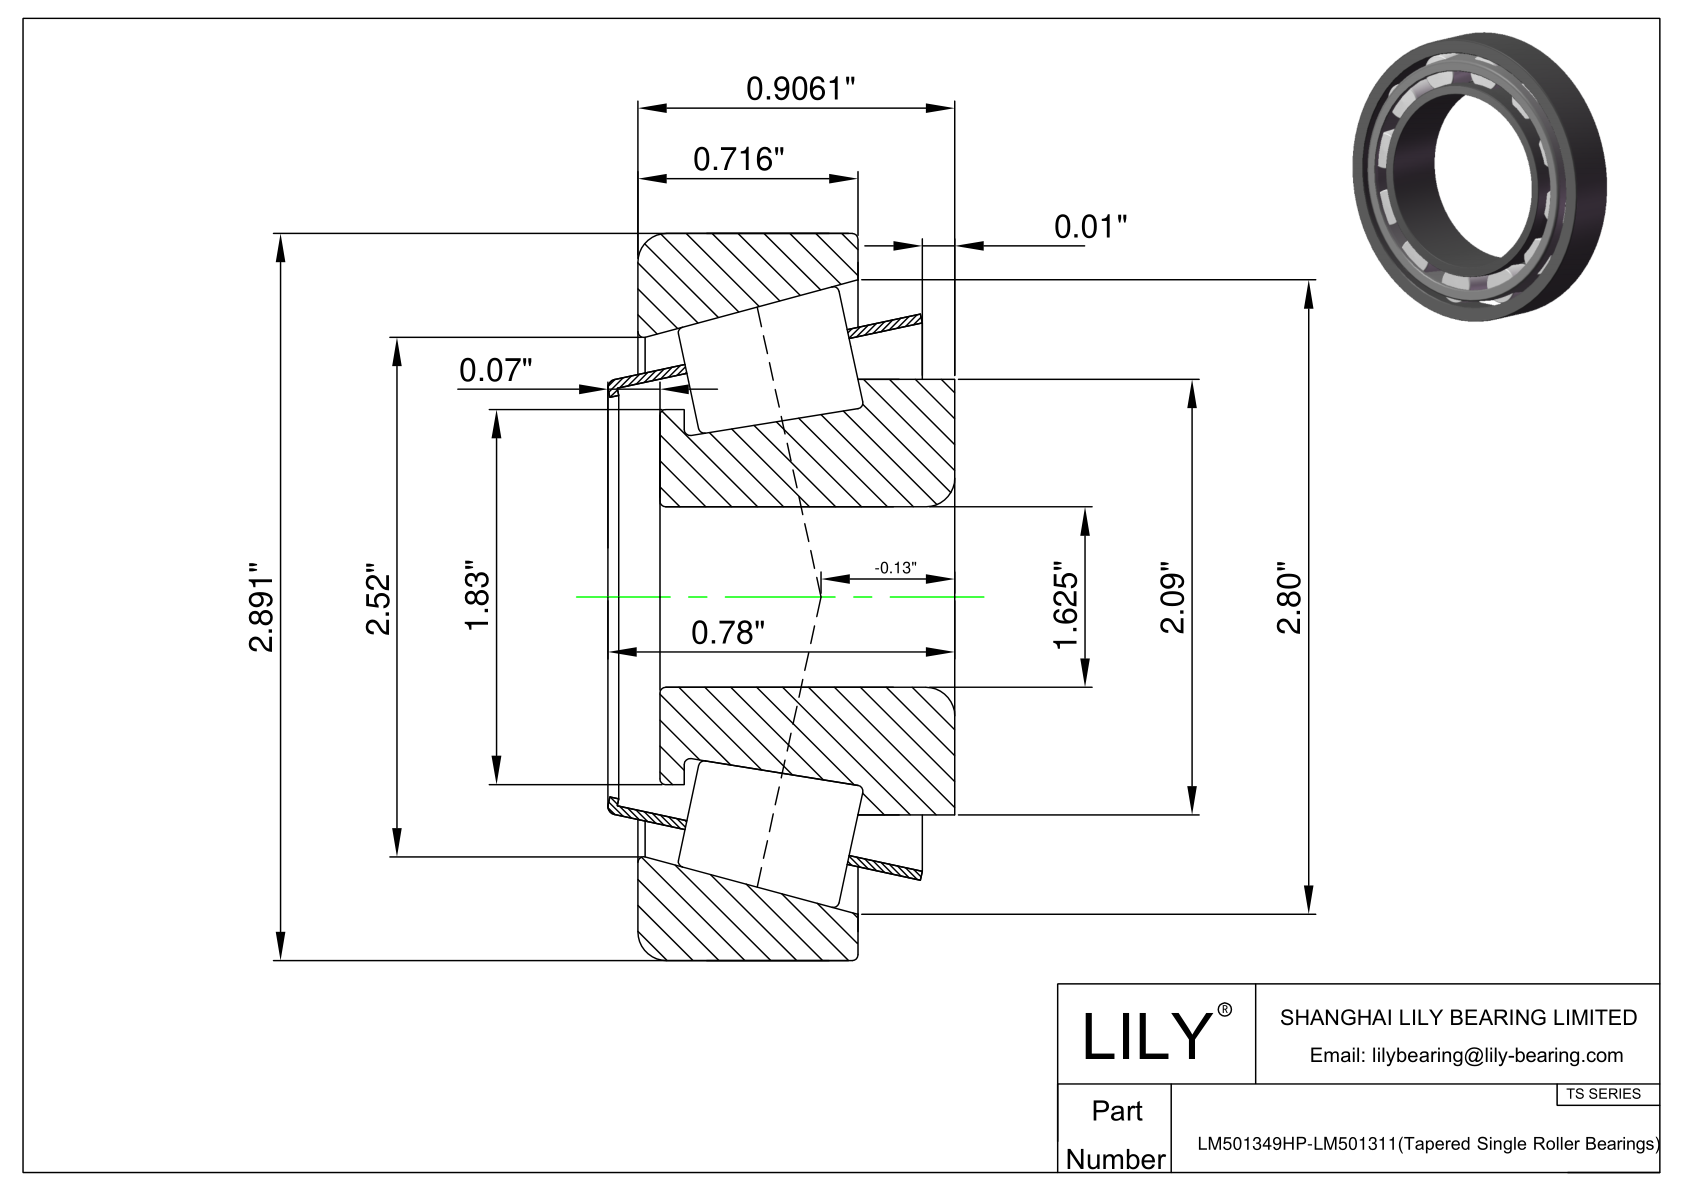 LM501349HP-LM501311 TS (Tapered Single Roller Bearings) (Imperial) cad drawing